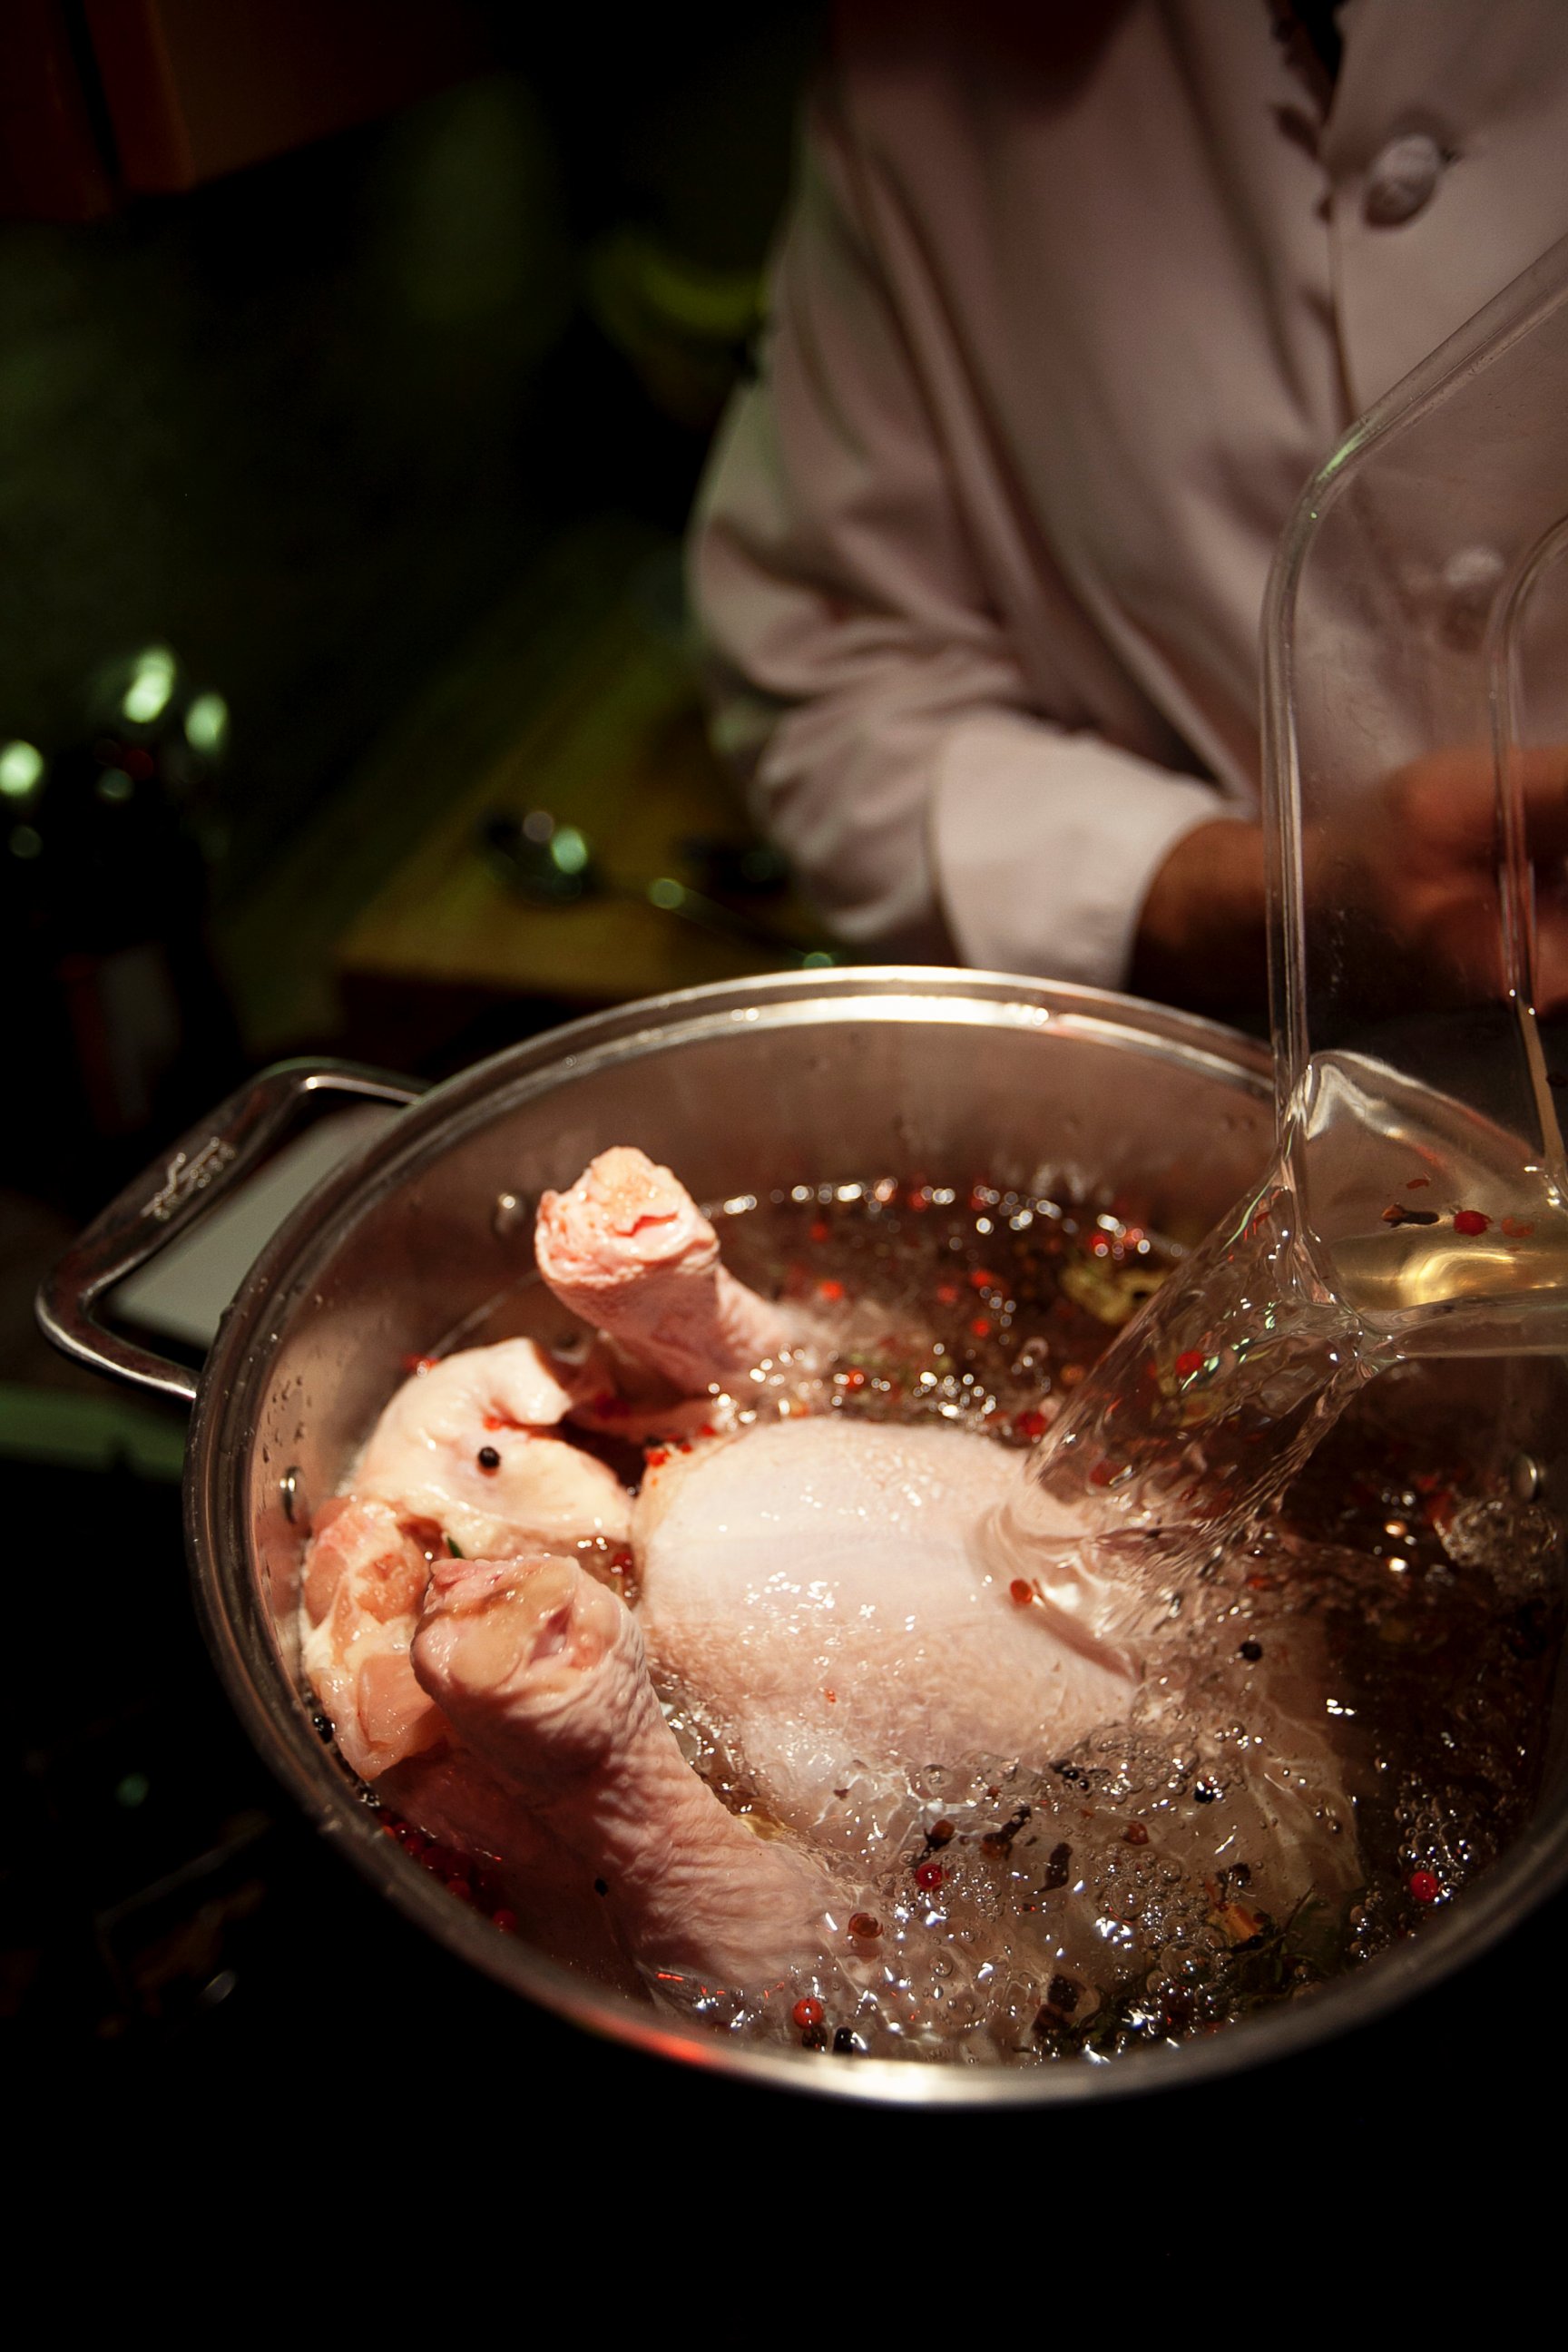 PHOTO: Anthony Caturano, chef/owner of Prezza, shows how he brines, roasts, and carves a turkey at his home in Saugus, Mass., Nov. 10, 2011. 